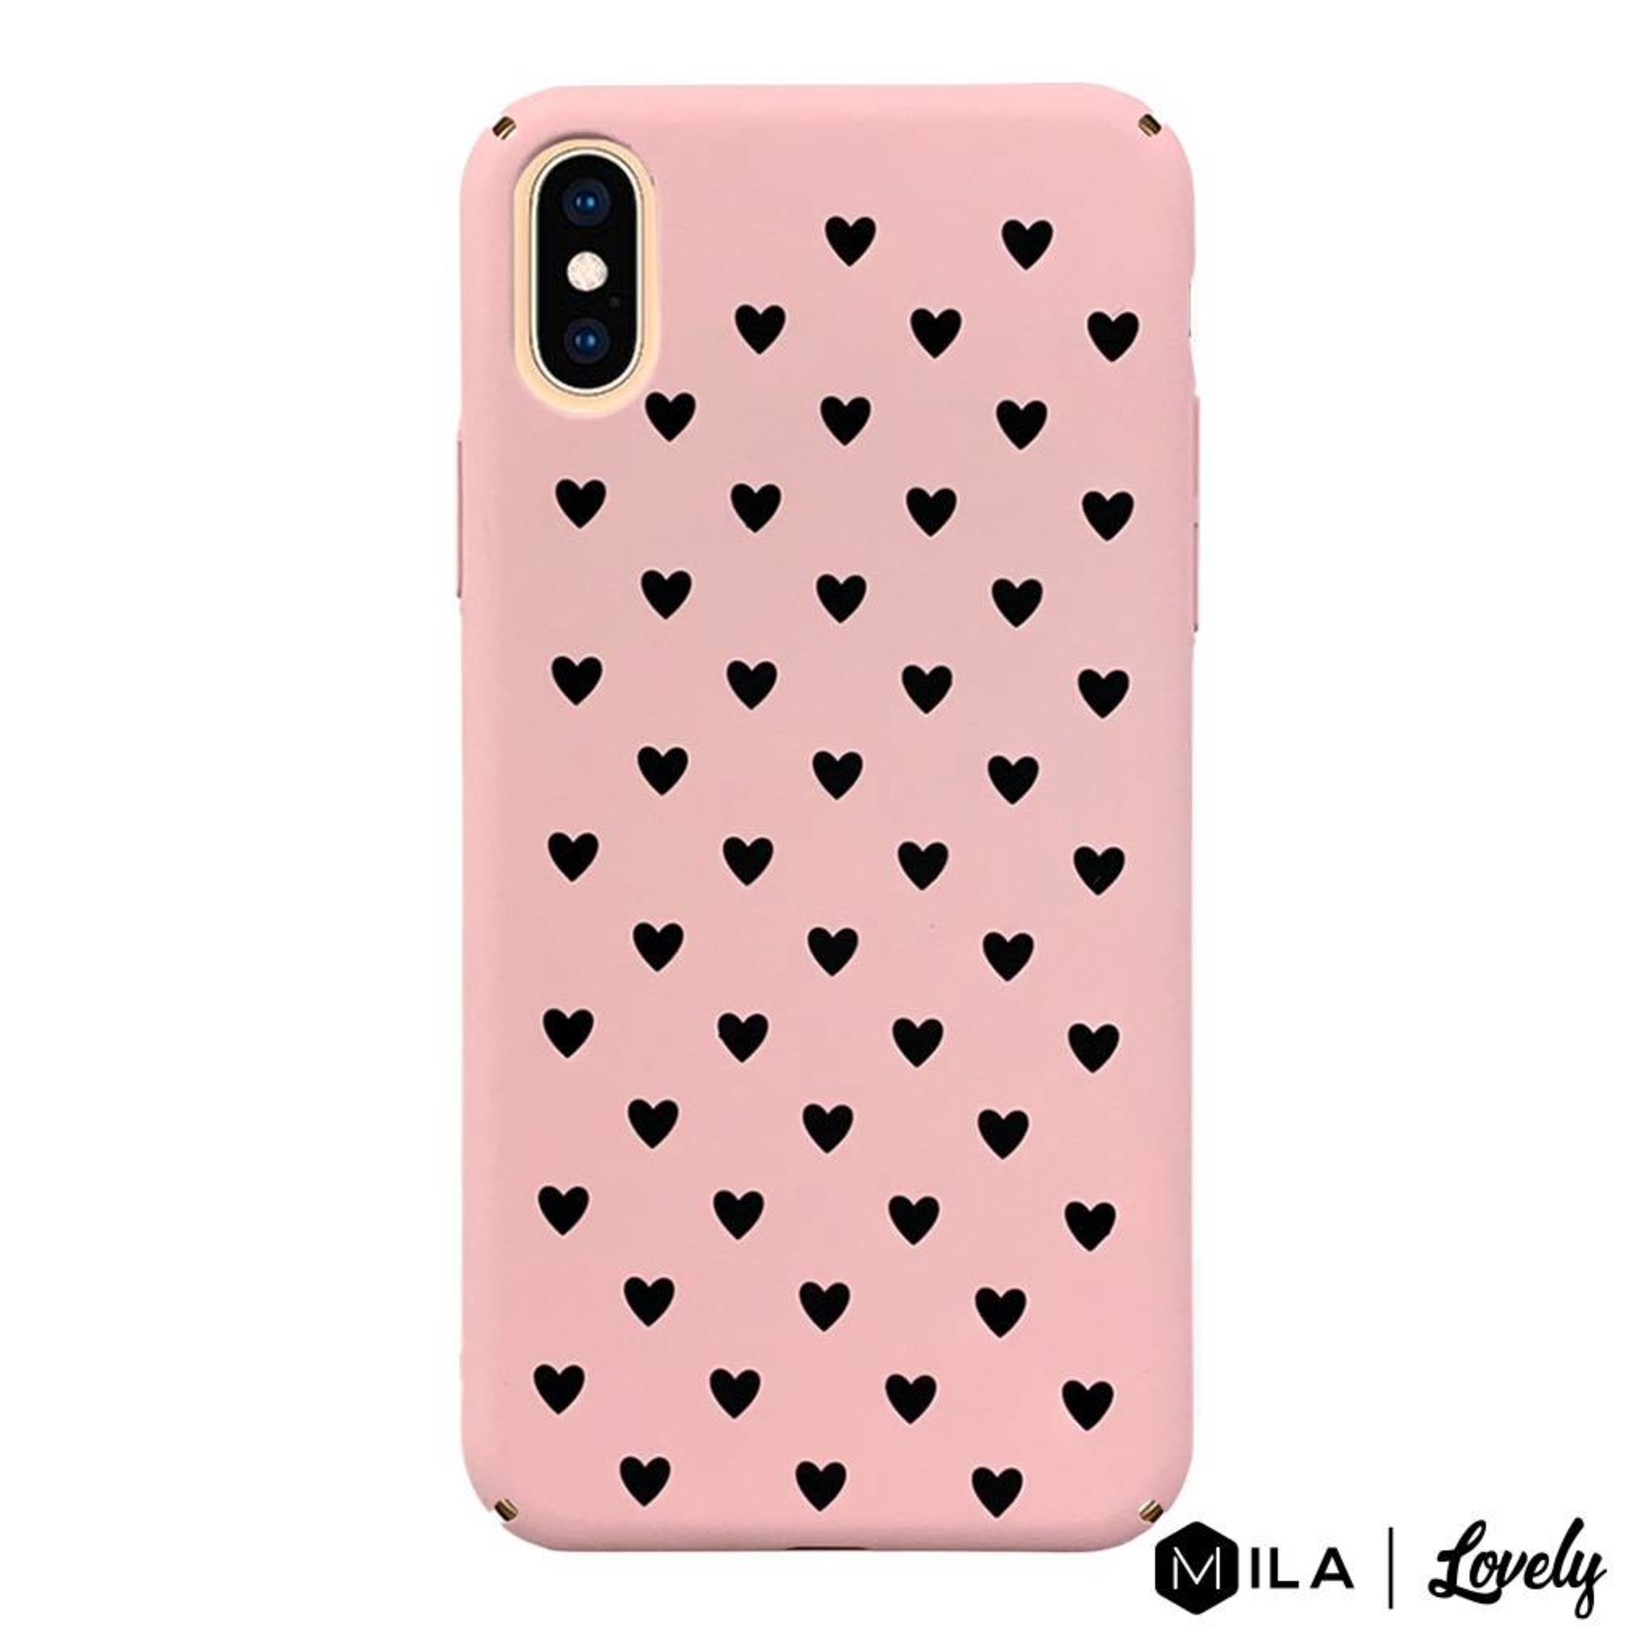 MILA | Lovely Heart Pattern Case for iPhone XS Max